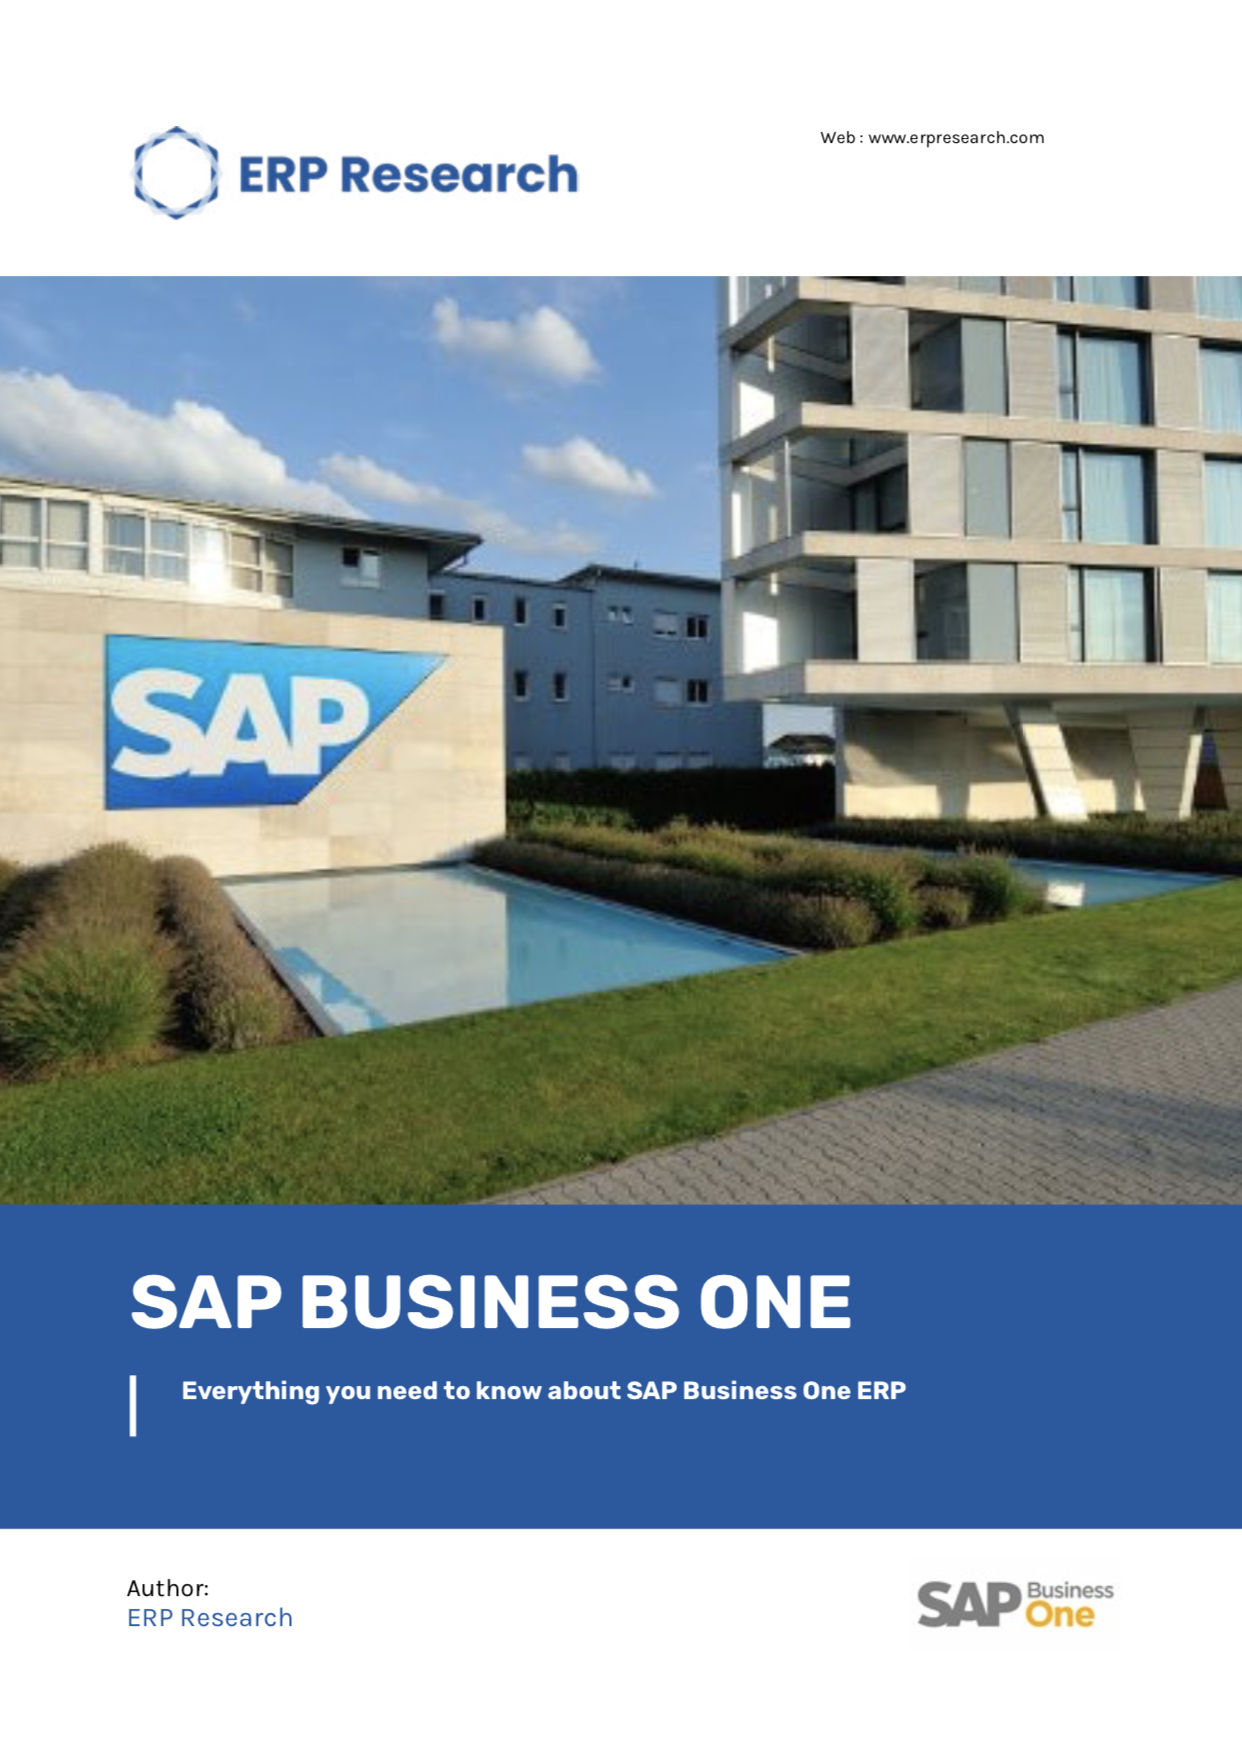 The SAP Business One Ebook is a free, comprehensive guide to the SAP Business One ERP. This Ebook is designed to help you get familiar with all that SAP Business One has to offer.